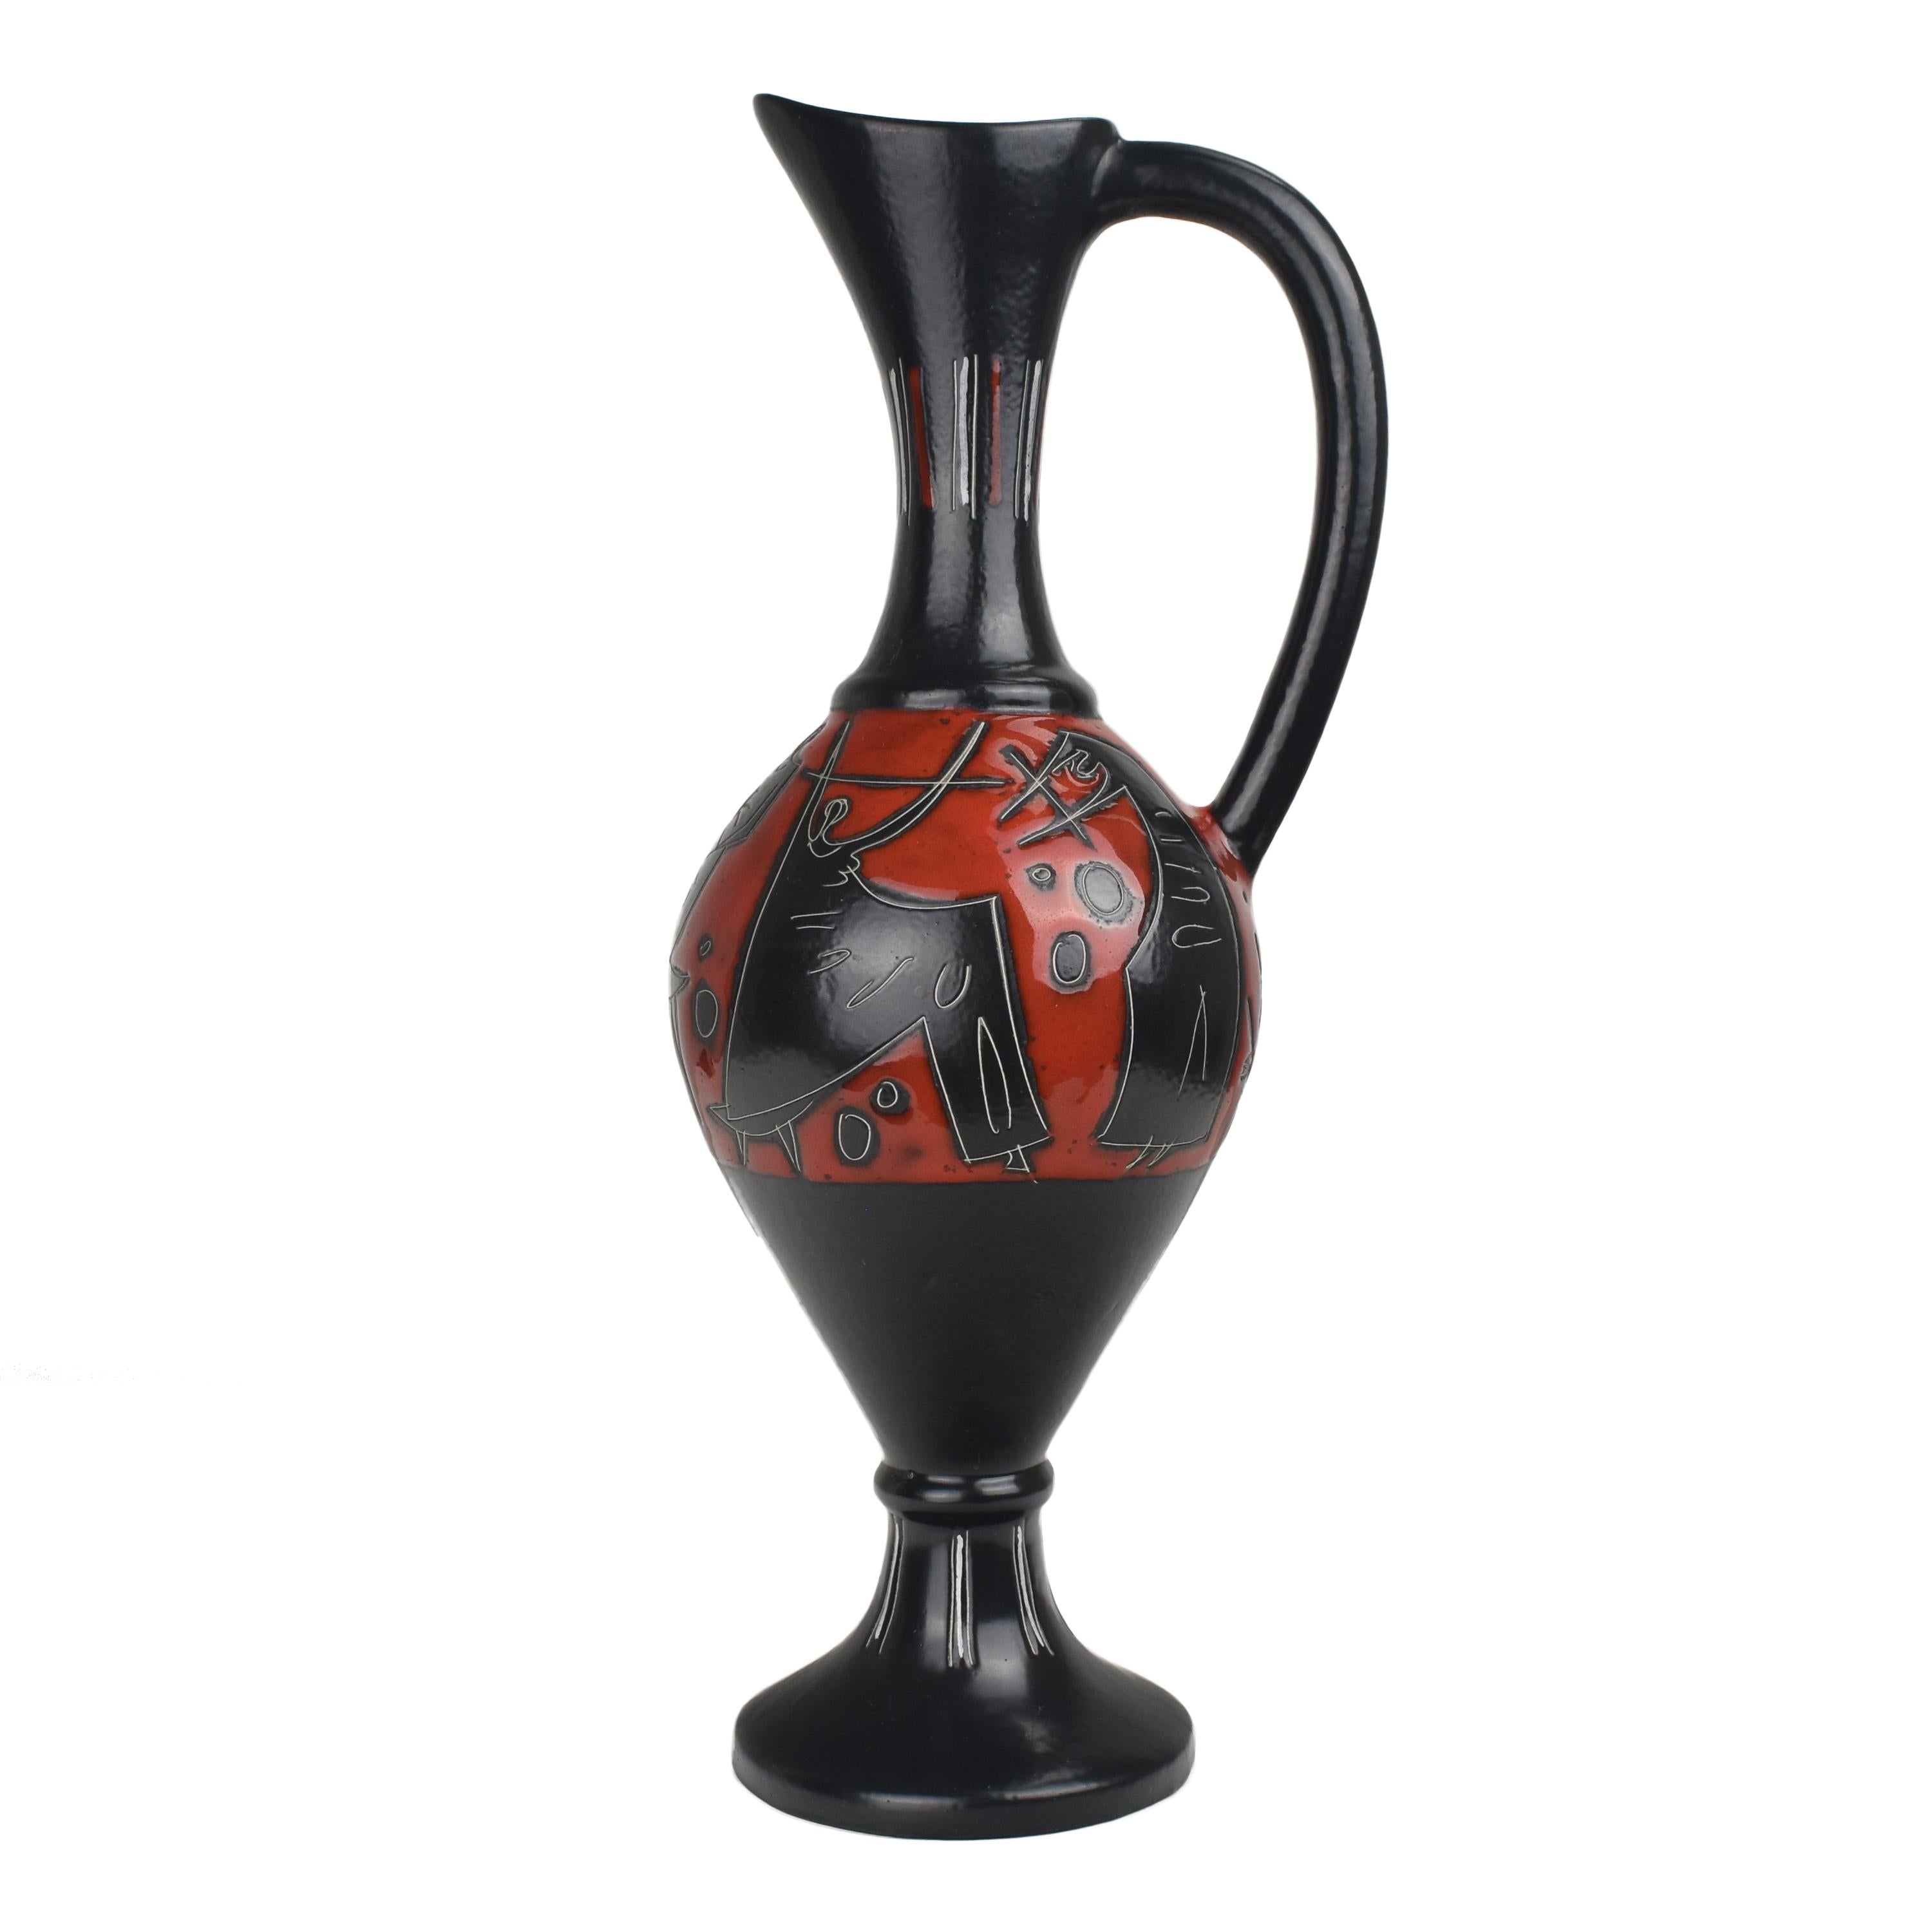 The vintage ceramic jug vase by Marcello Fantoni from the 1960s is an exceptional and artistic piece that exemplifies the mastery of Italian ceramics during that era. Marcello Fantoni was a renowned Italian ceramist and sculptor known for his